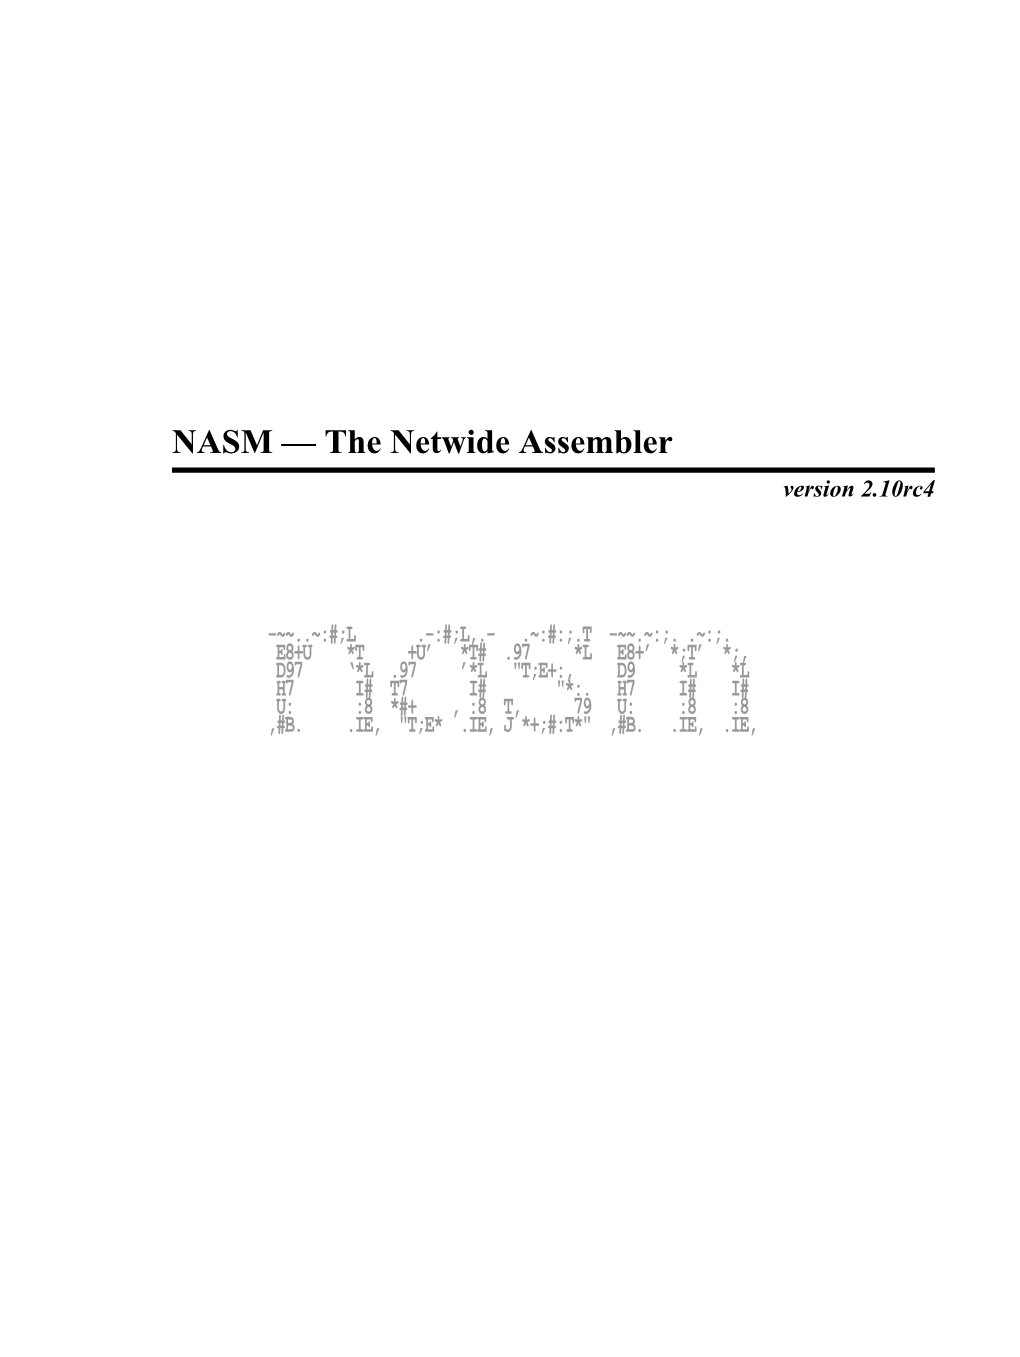 NASM — the Netwide Assembler Version 2.10Rc4